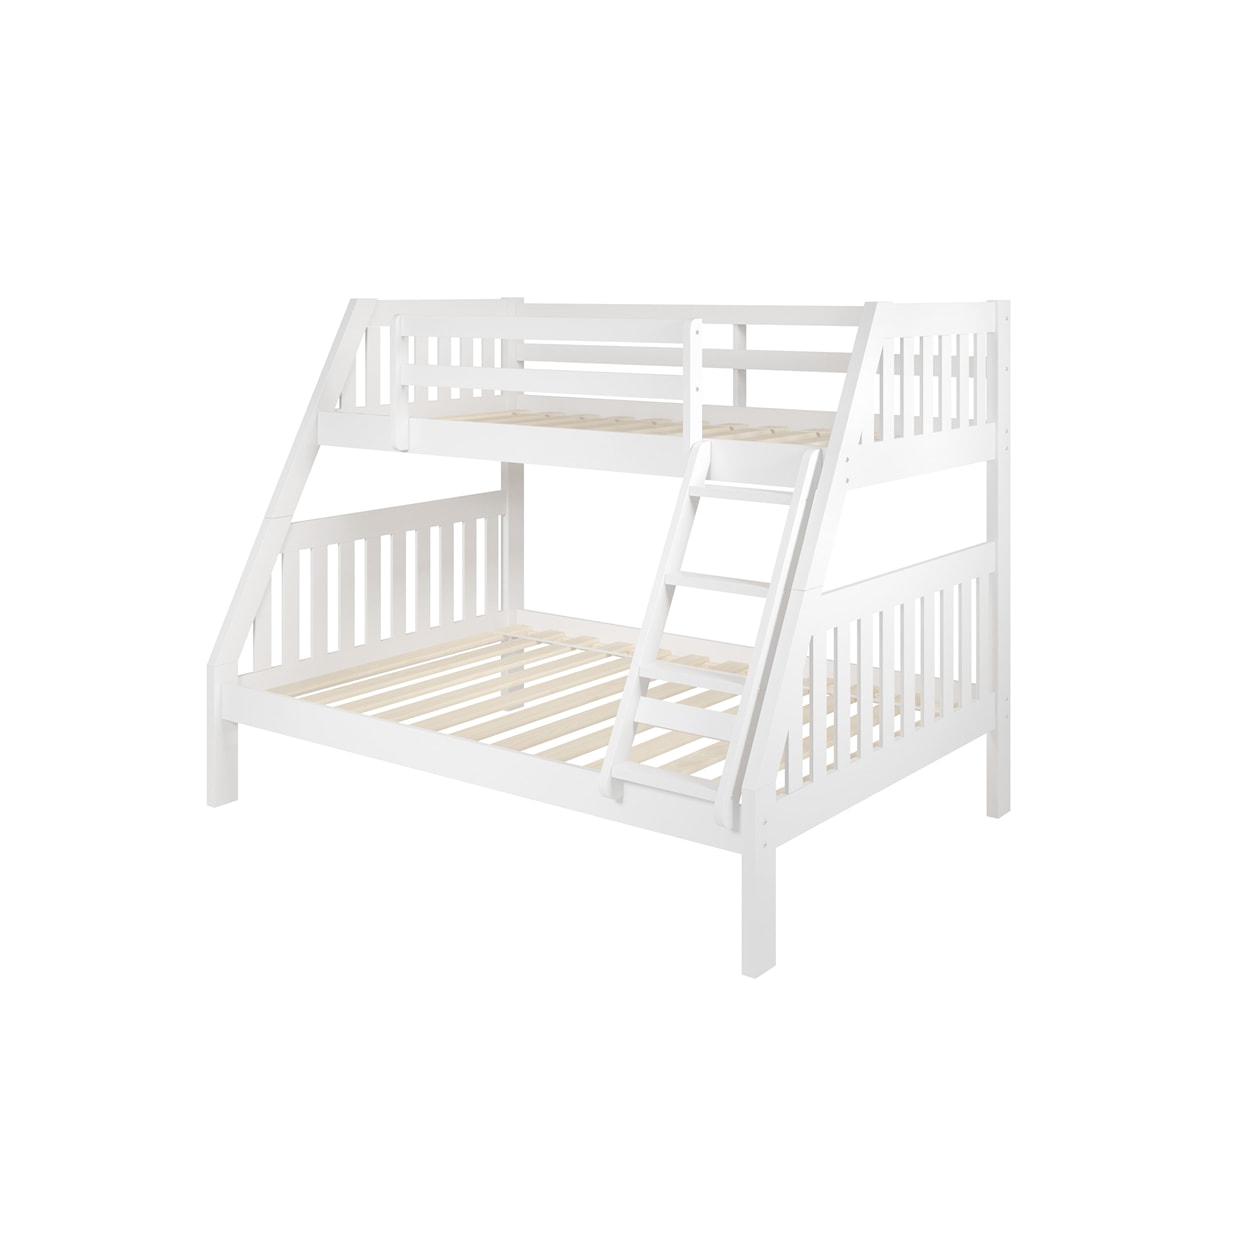 Donco Trading Co 1018 MISSION WHITE TWIN/FULL BUNK | BED